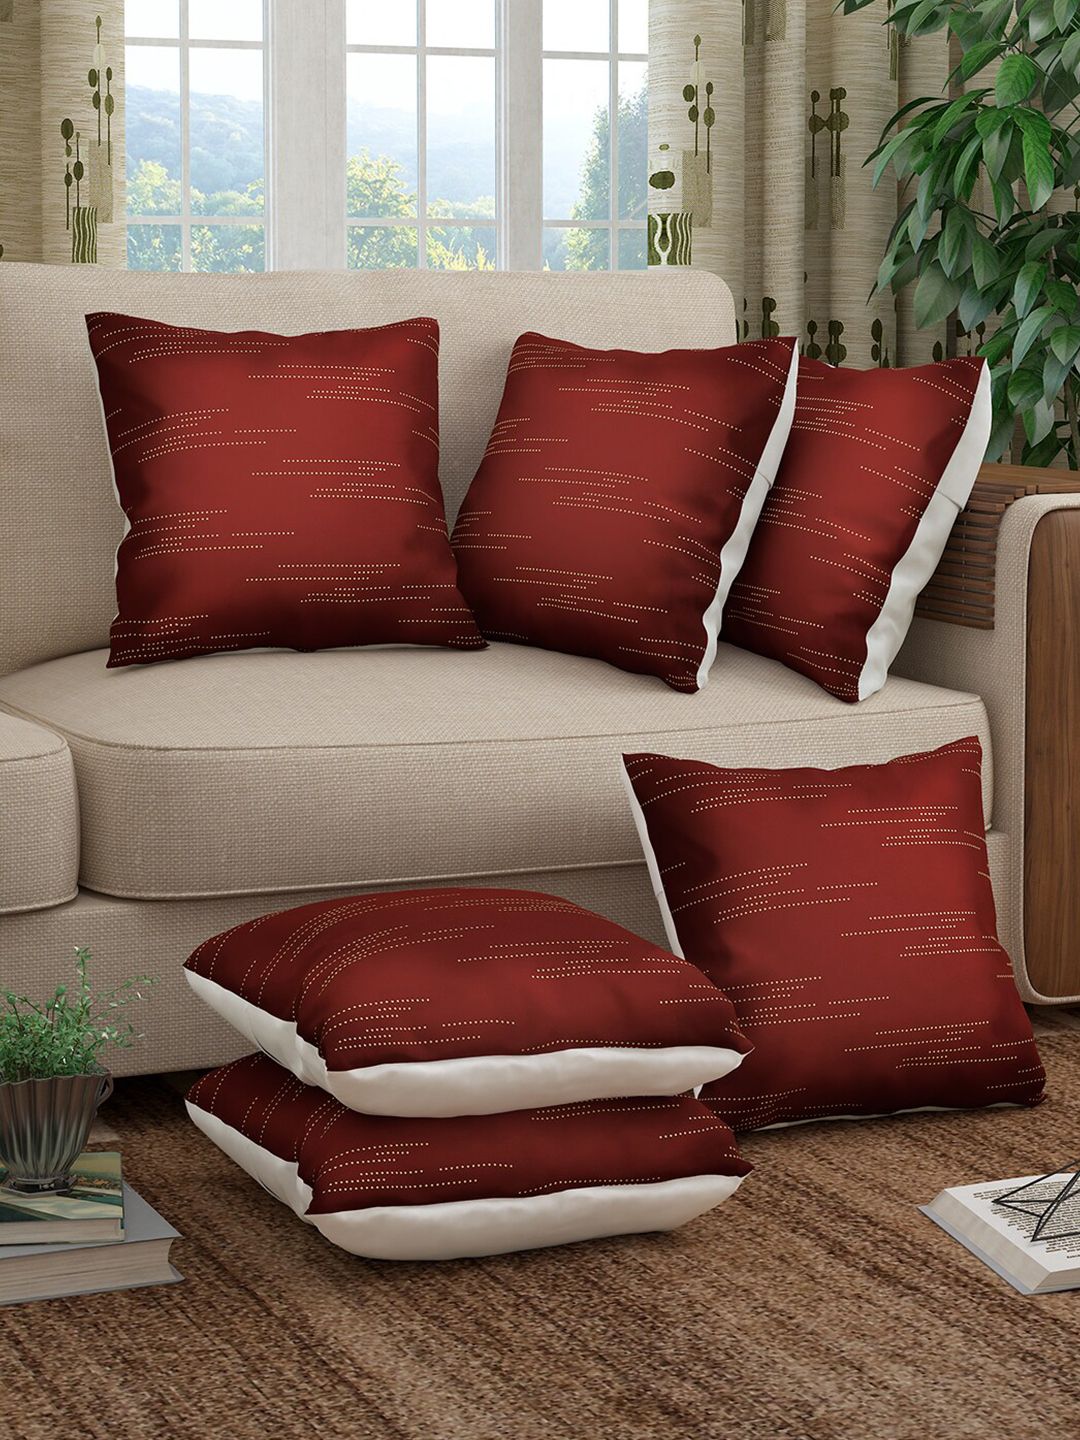 Story@home Red & White Set of 6 Striped Square Cushion Covers Price in India